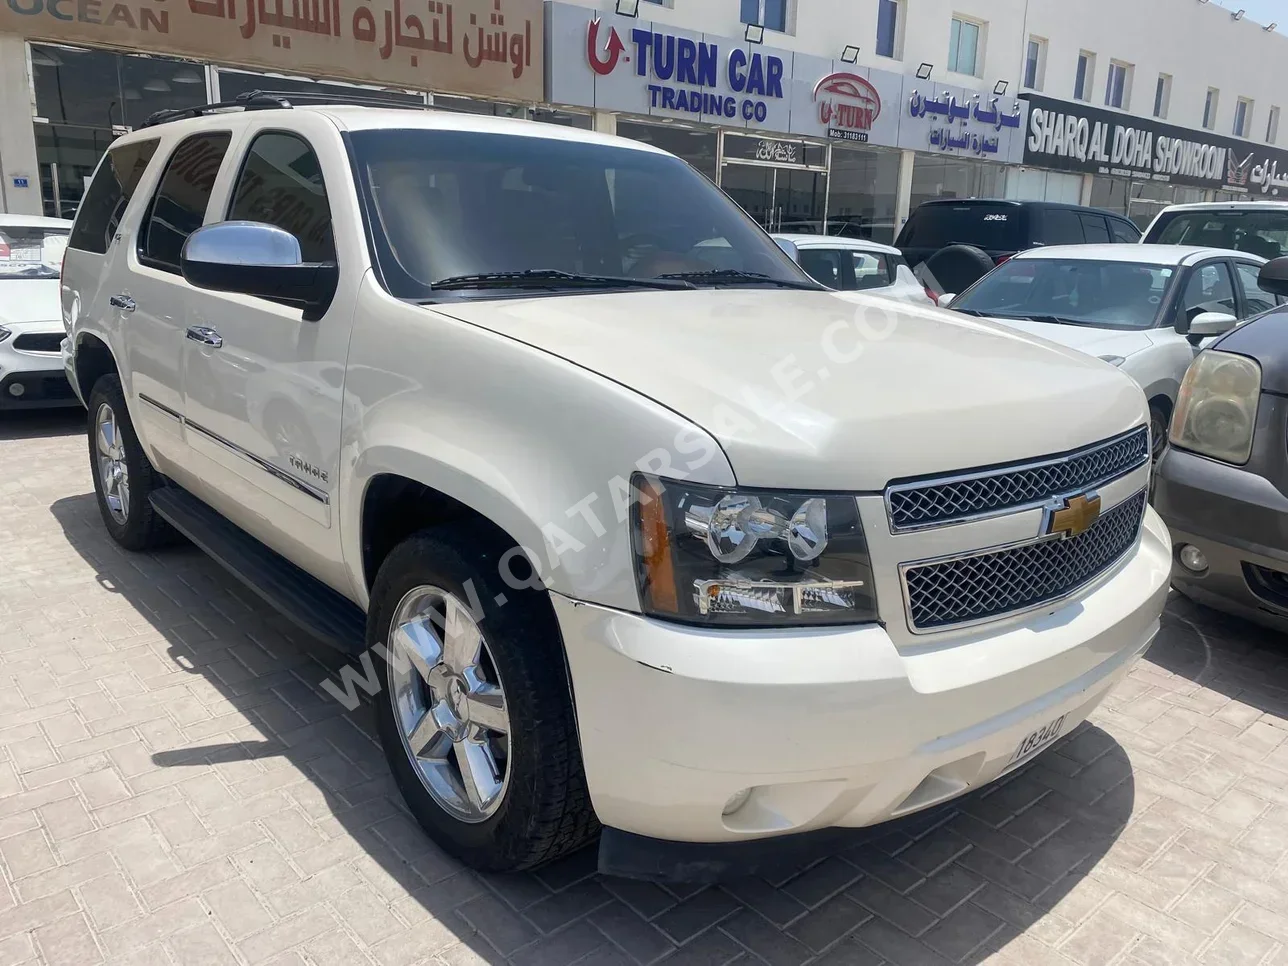 Chevrolet  Tahoe  LTZ  2013  Automatic  263,000 Km  8 Cylinder  Four Wheel Drive (4WD)  SUV  White